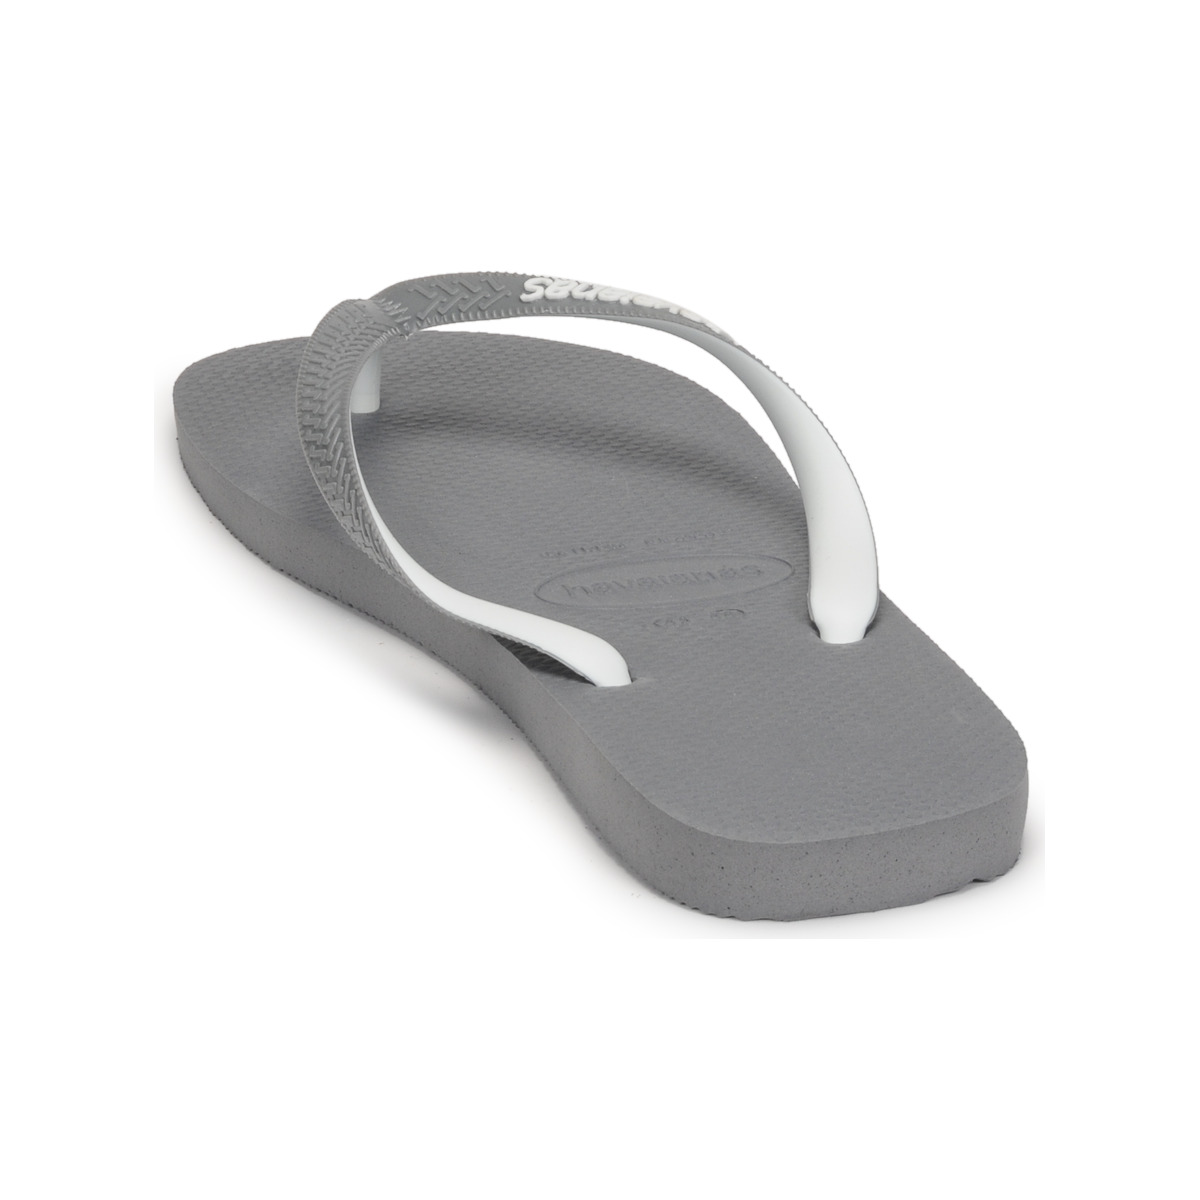 Havaianas Gris TOP MIX Uk5a62aE